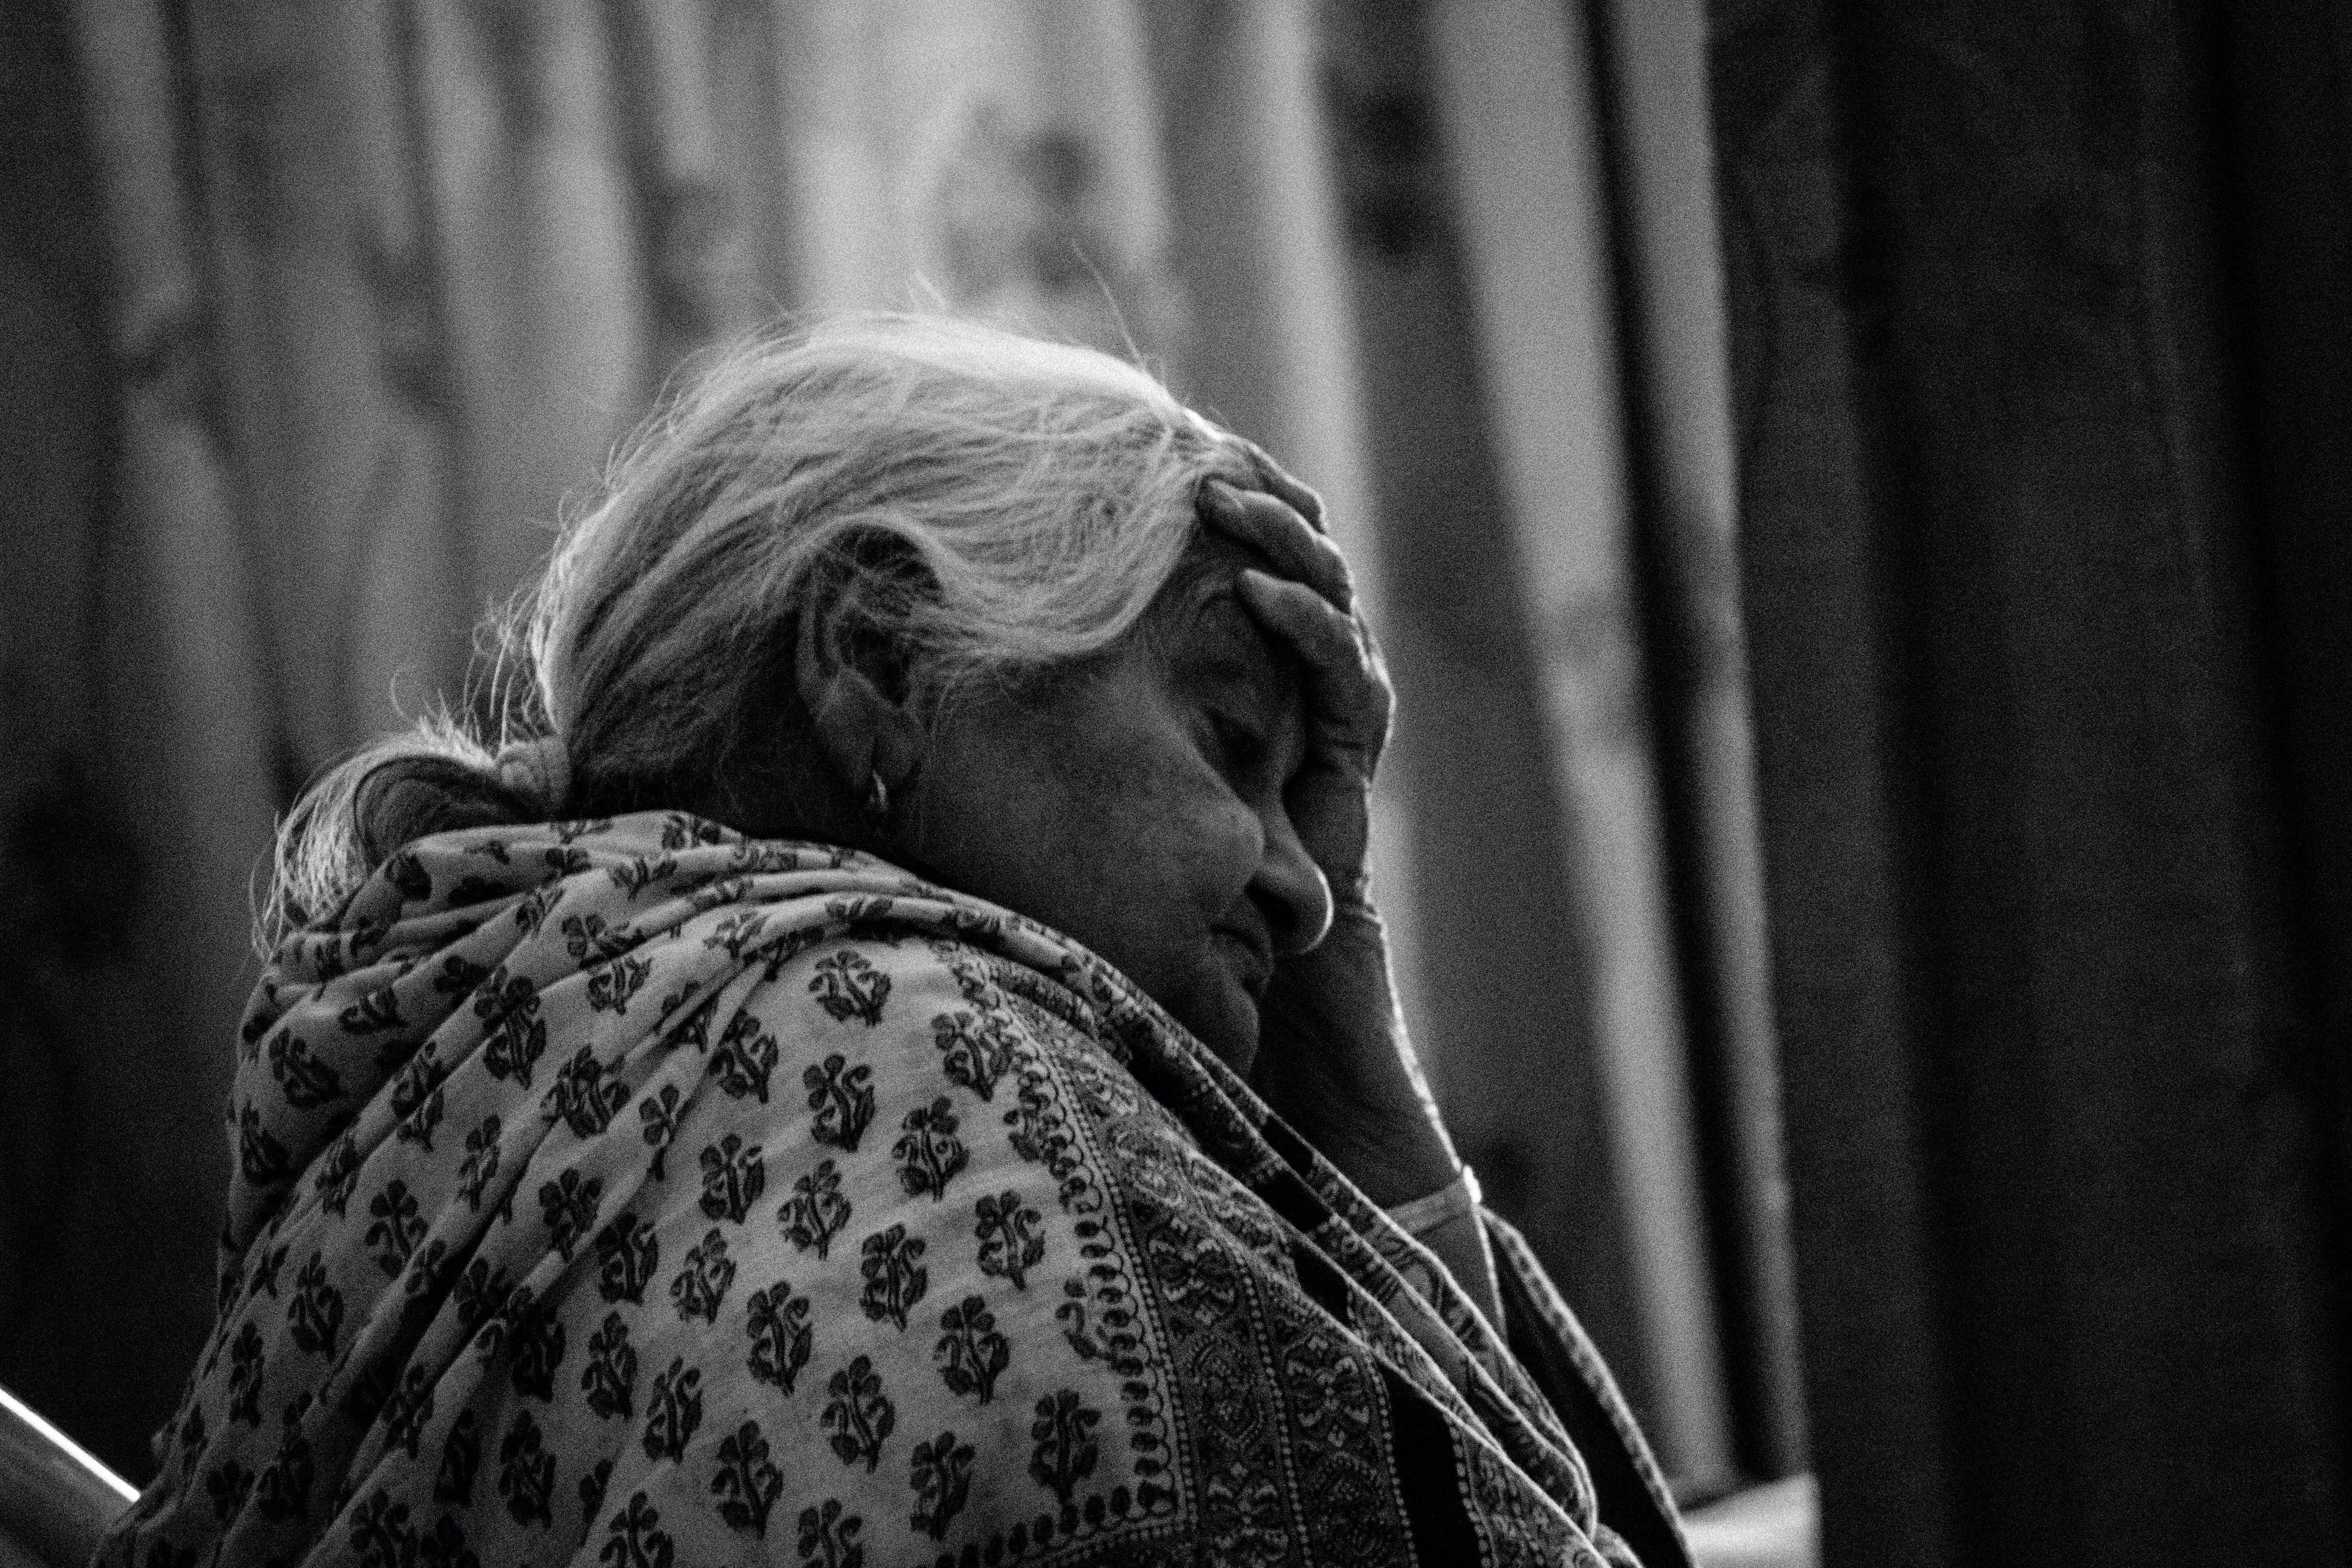 James found an old woman weeping in the corner of a room. | Source: Pexels